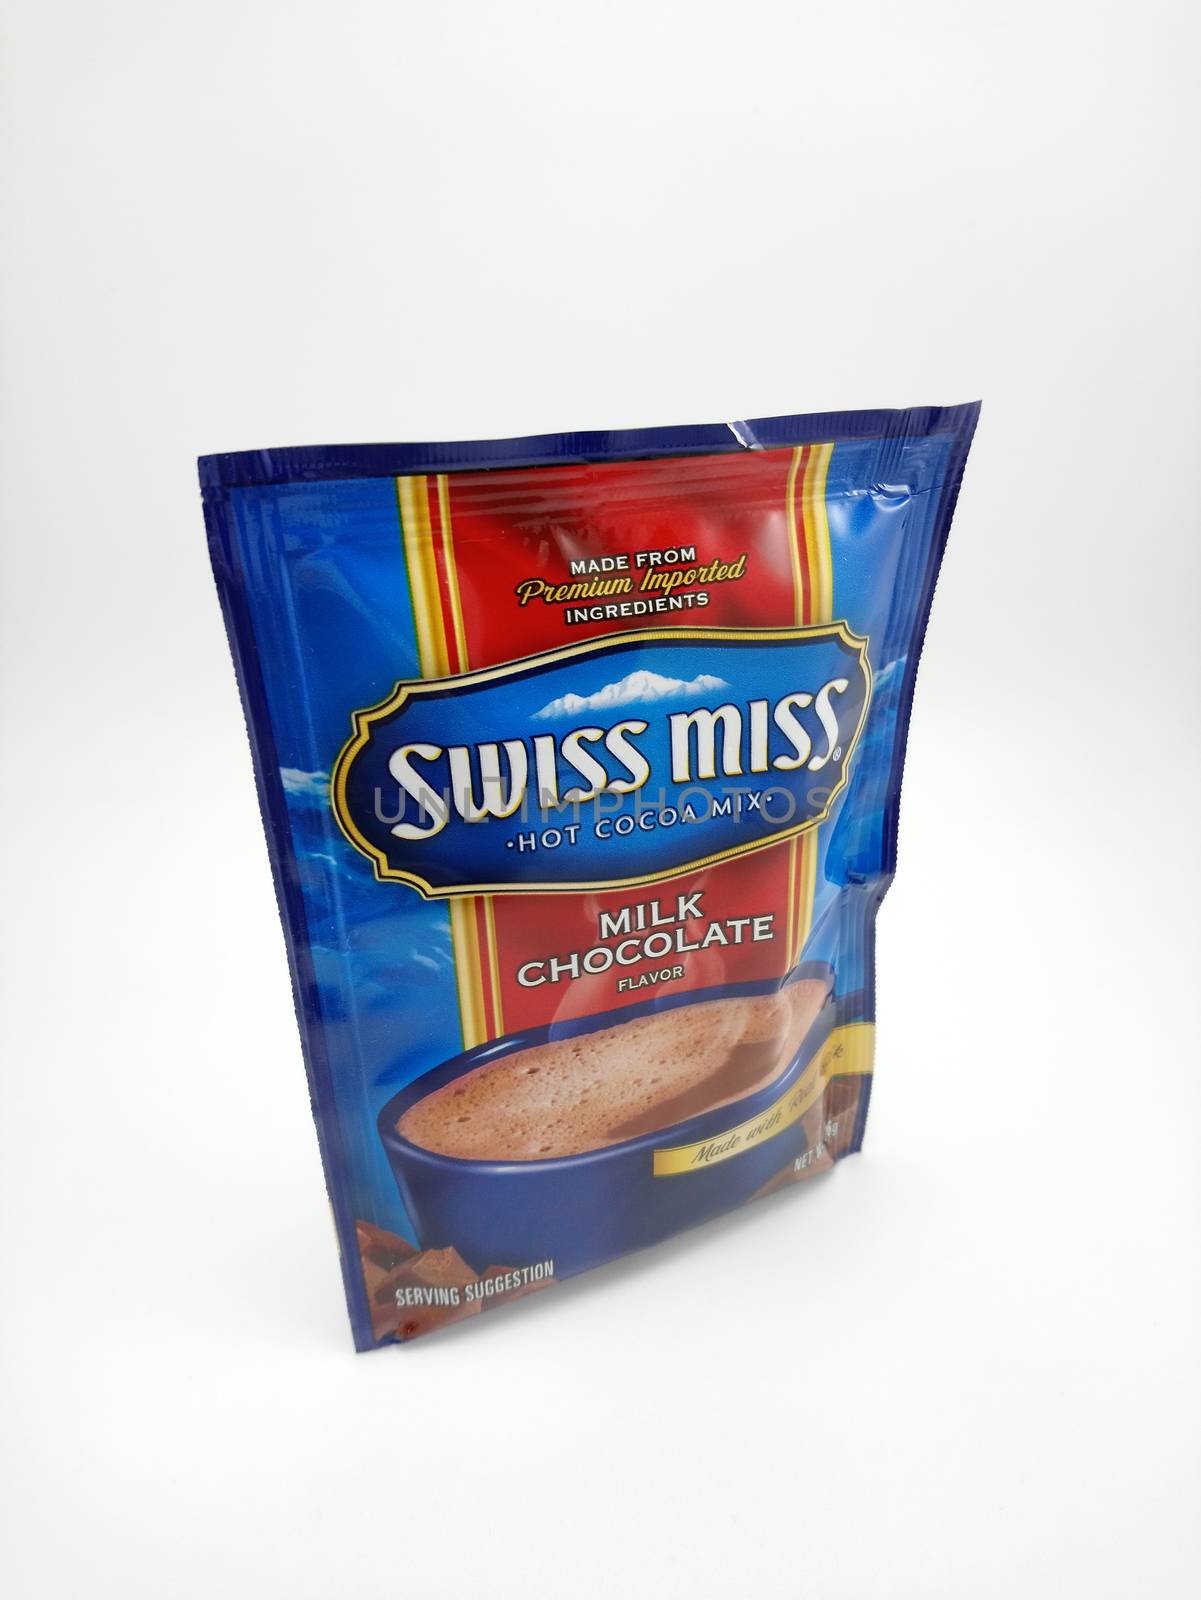 Swiss miss hot cocoa drink milk chocolate in Manila, Philippines by imwaltersy